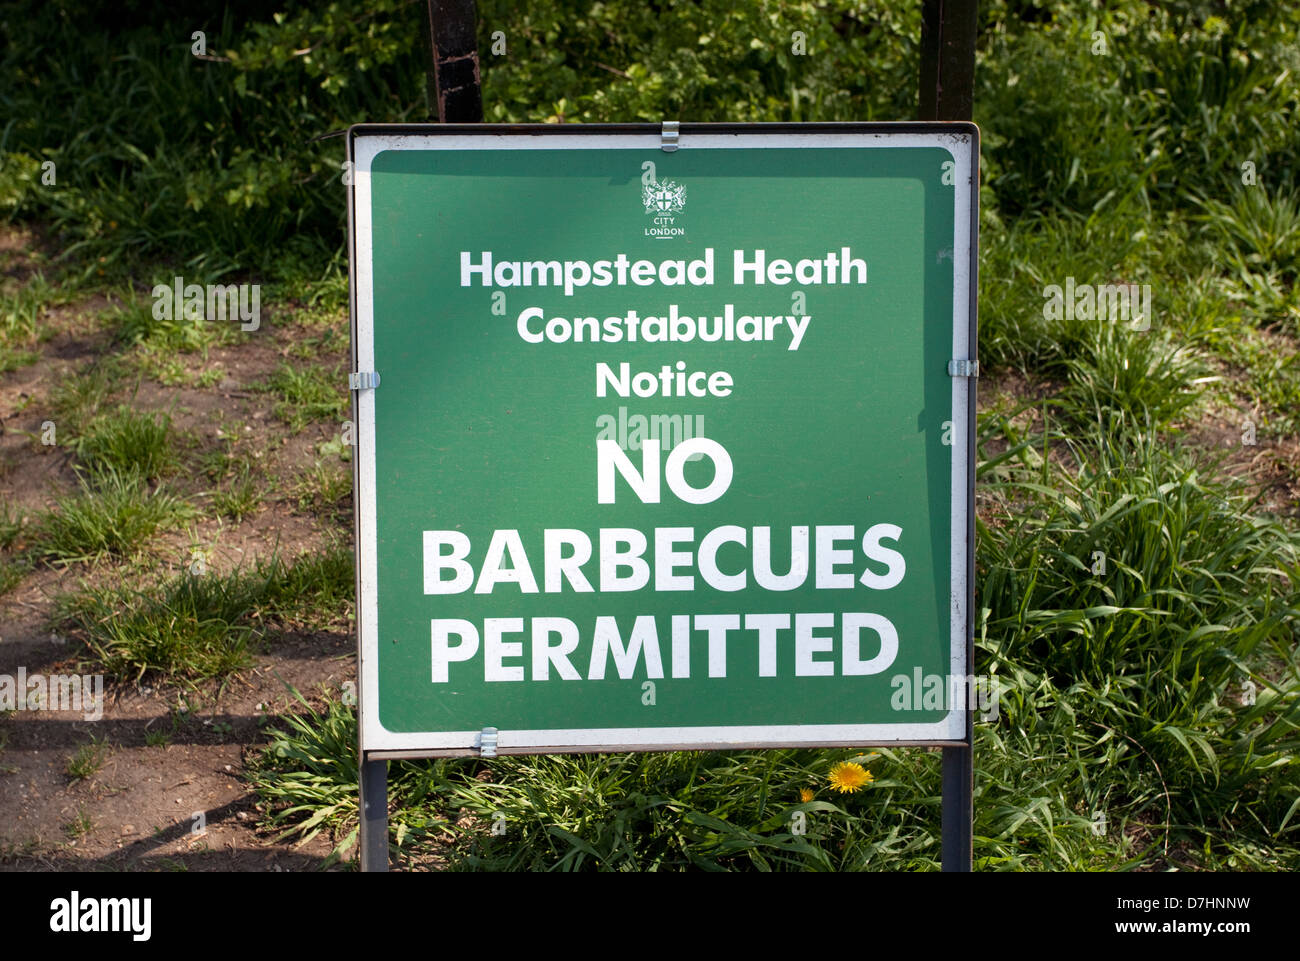 No Barbecues Permitted notice at entrance to Hampstead Heath, London Stock Photo